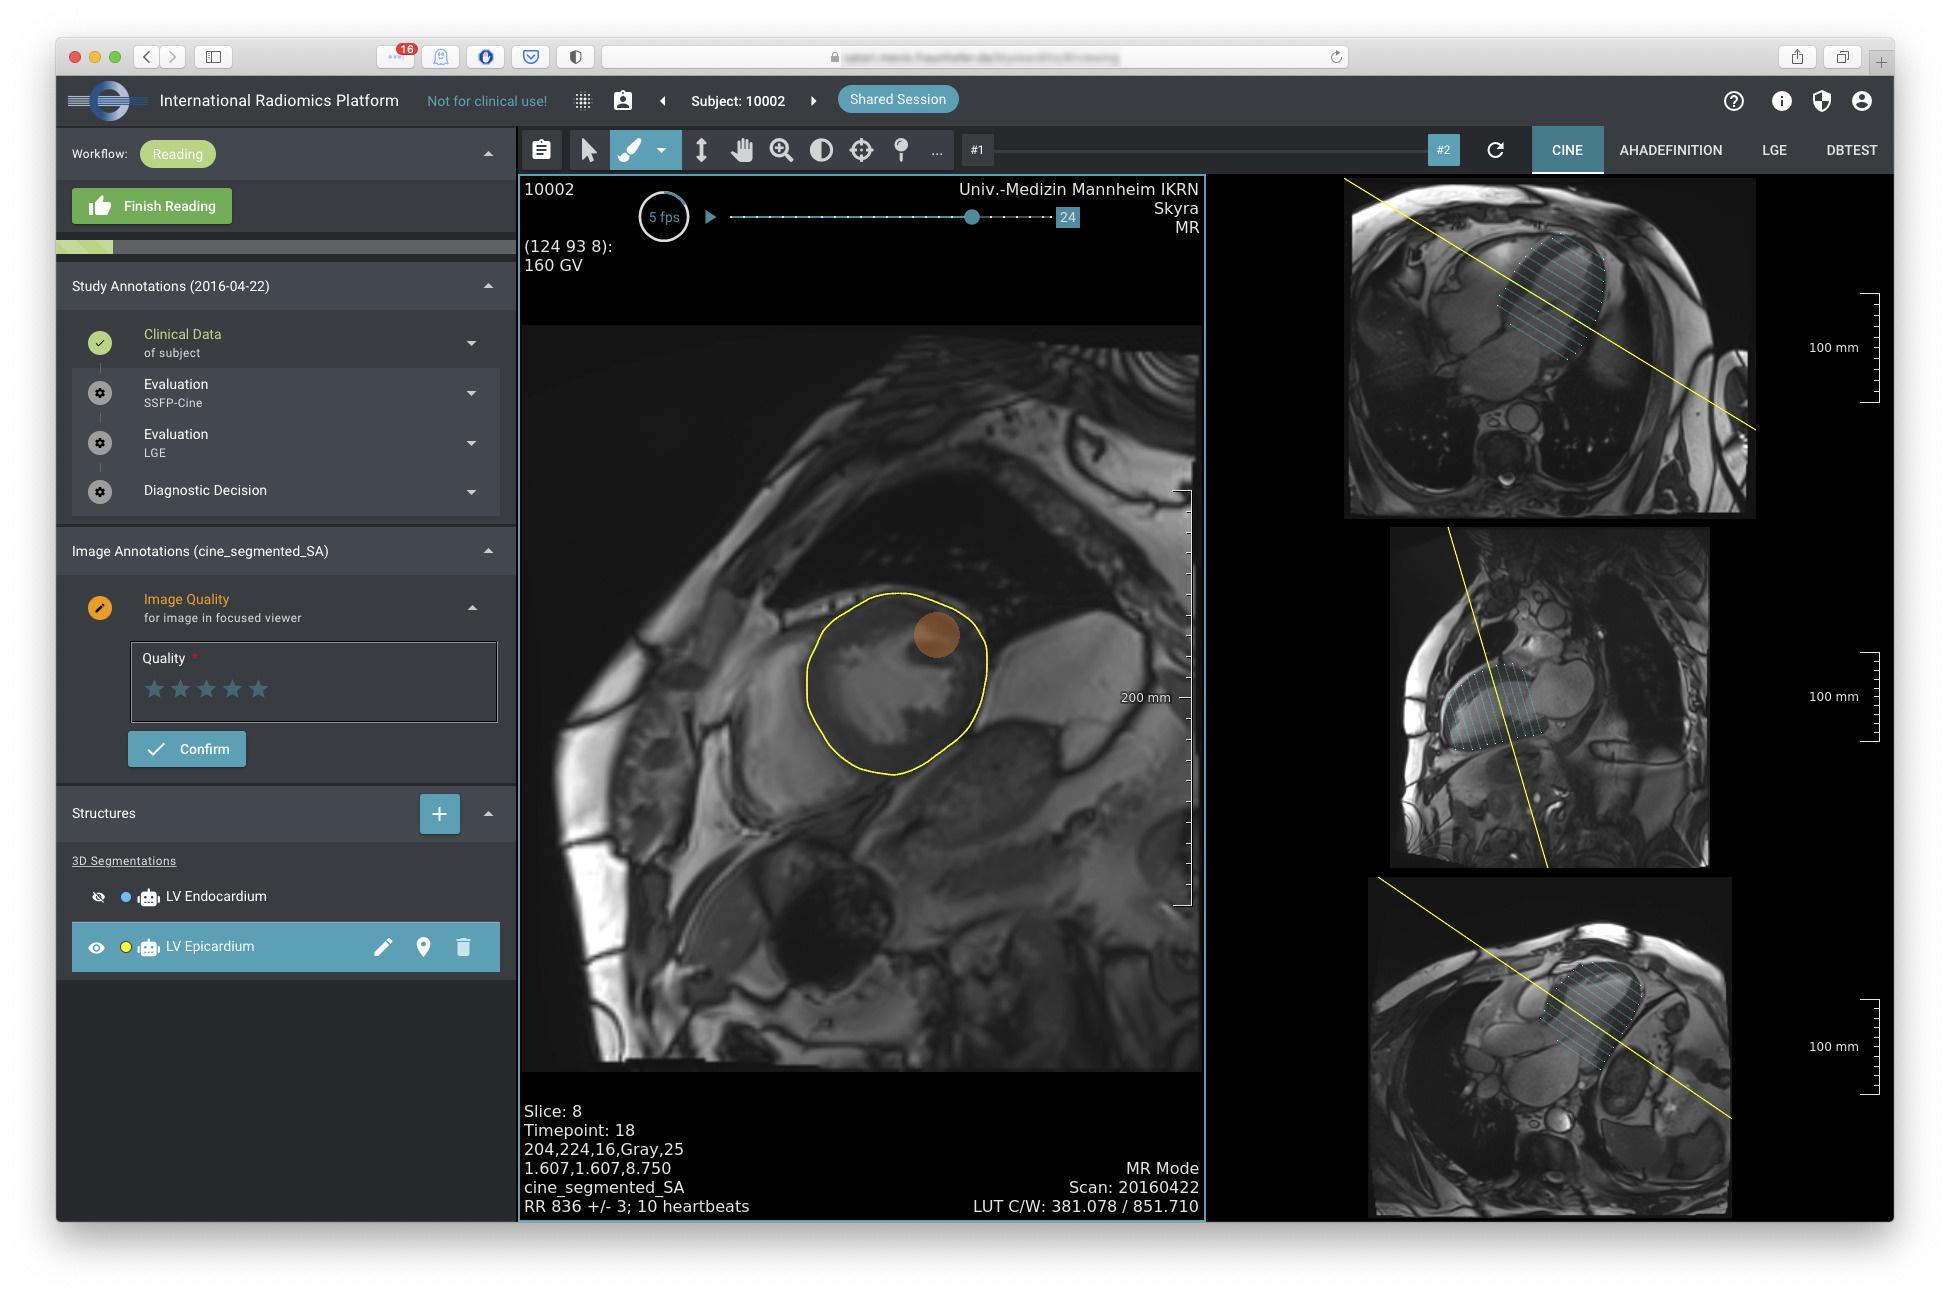 Screenshot of a browser showing the SATORI application with various radiological images arranged next to a list of relevant clinical information and structures found in these images.